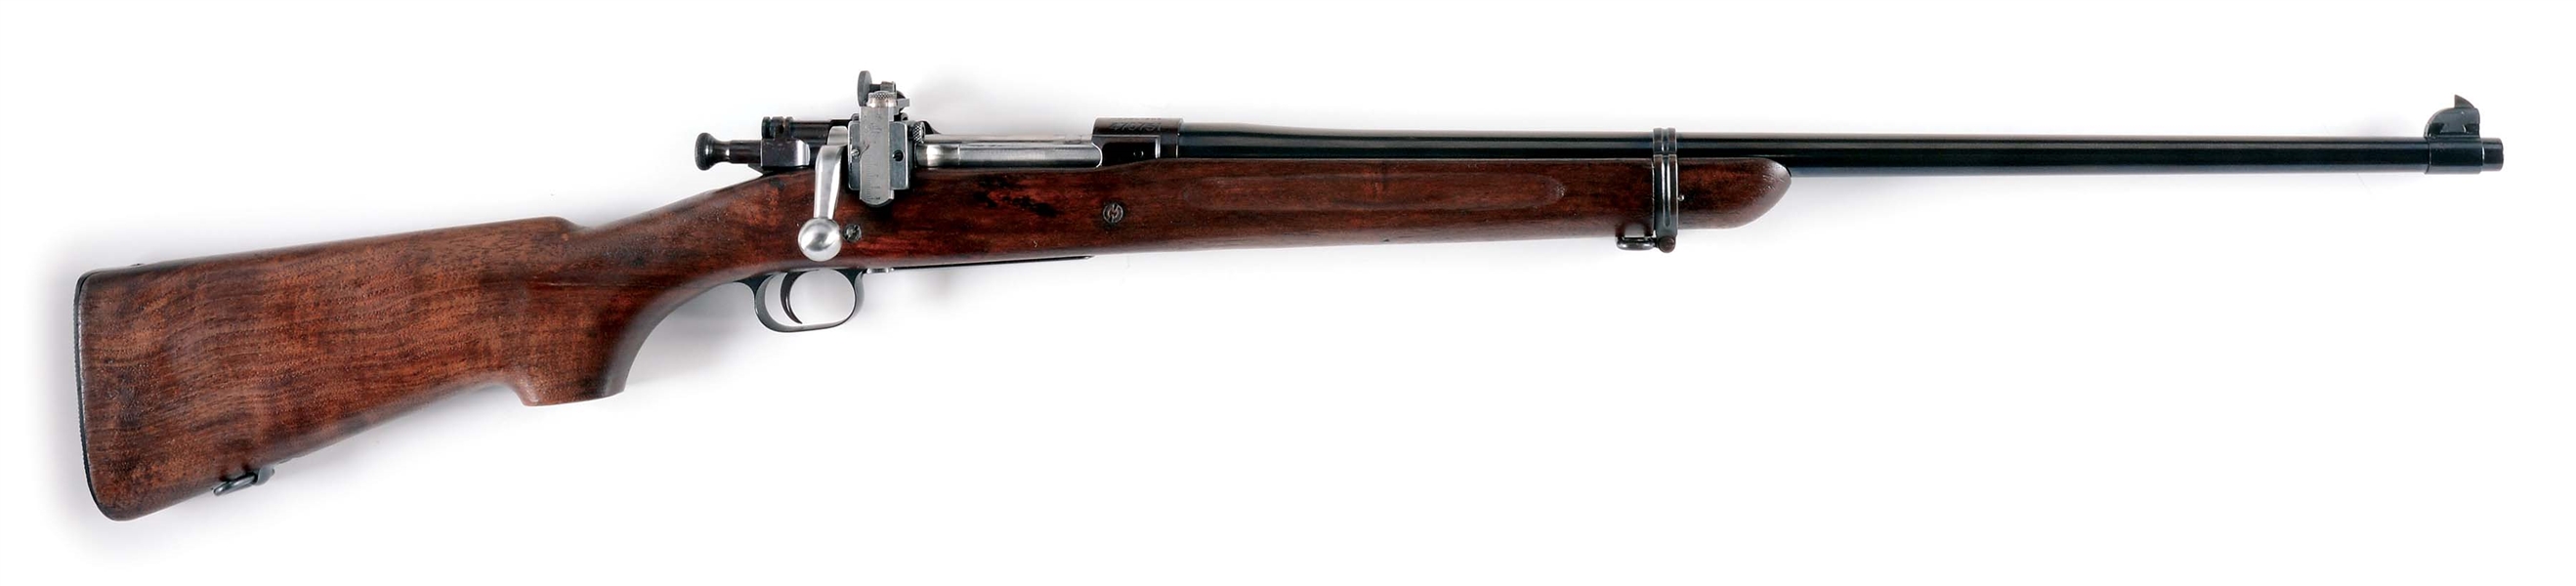 (C) NBA STYLE SPRINGFIELD SPORTING MODEL 1903 BOLT ACTION RIFLE.